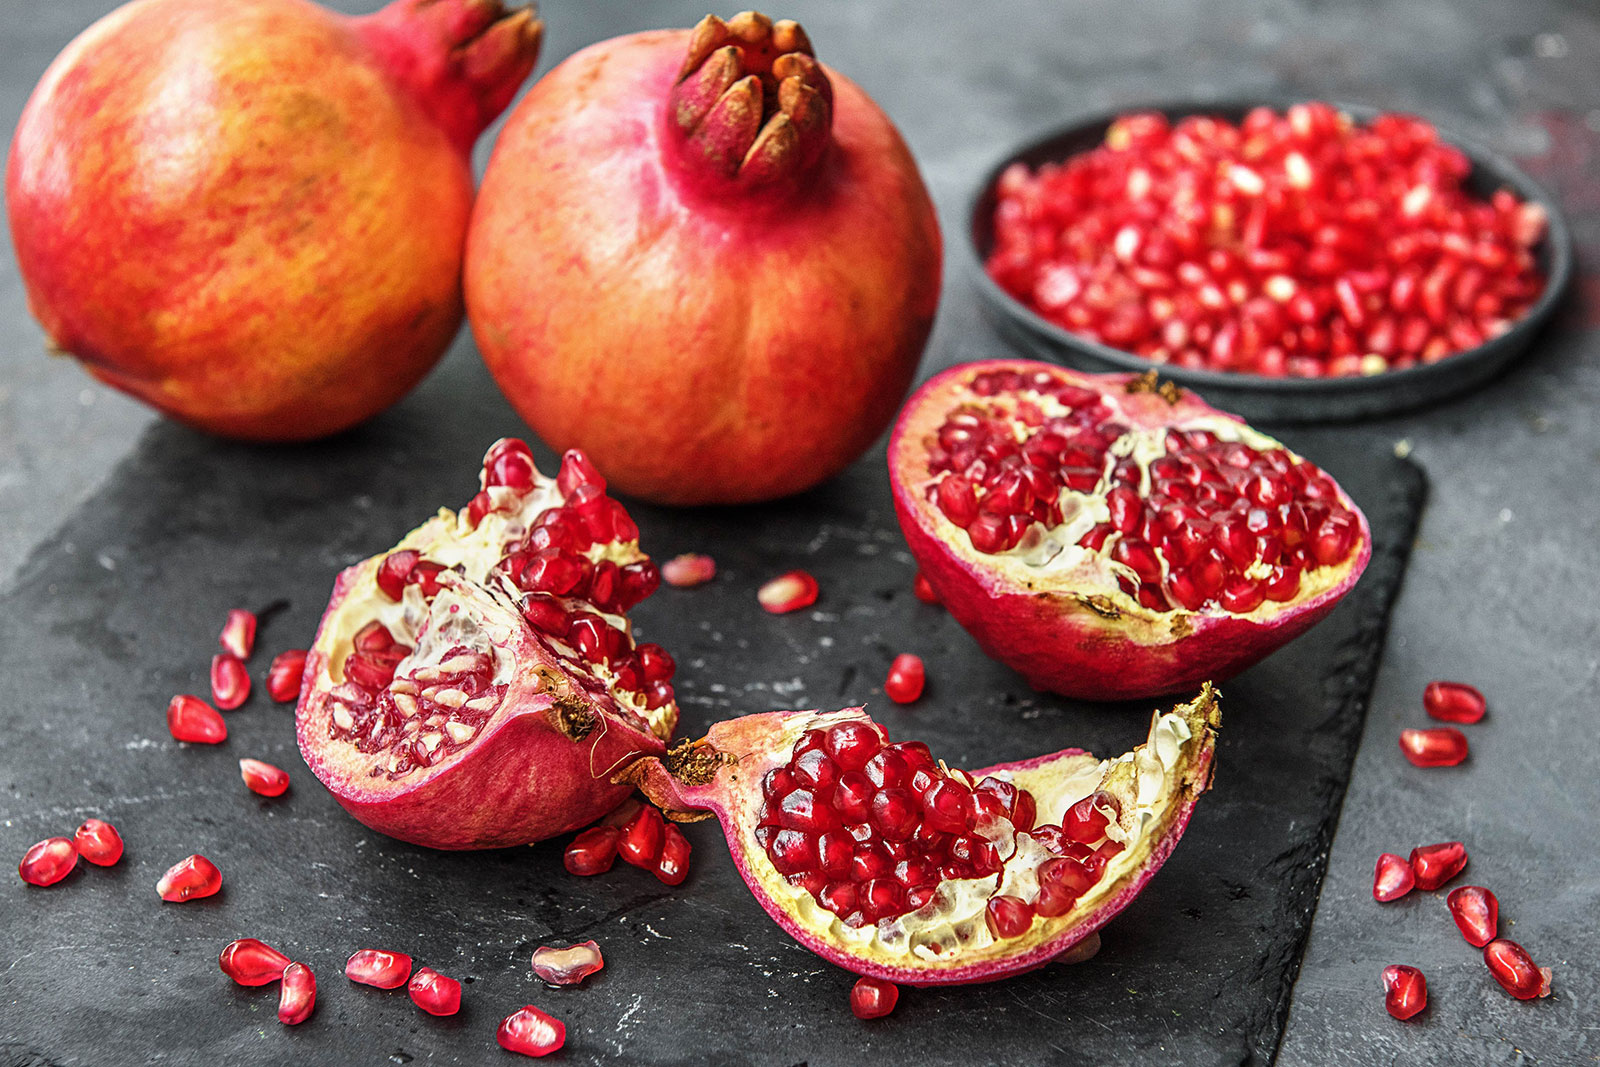 💖 If You Like Eating 27/35 of These Aphrodisiacs, You’re a 🥰 Real Romantic Pomegranate